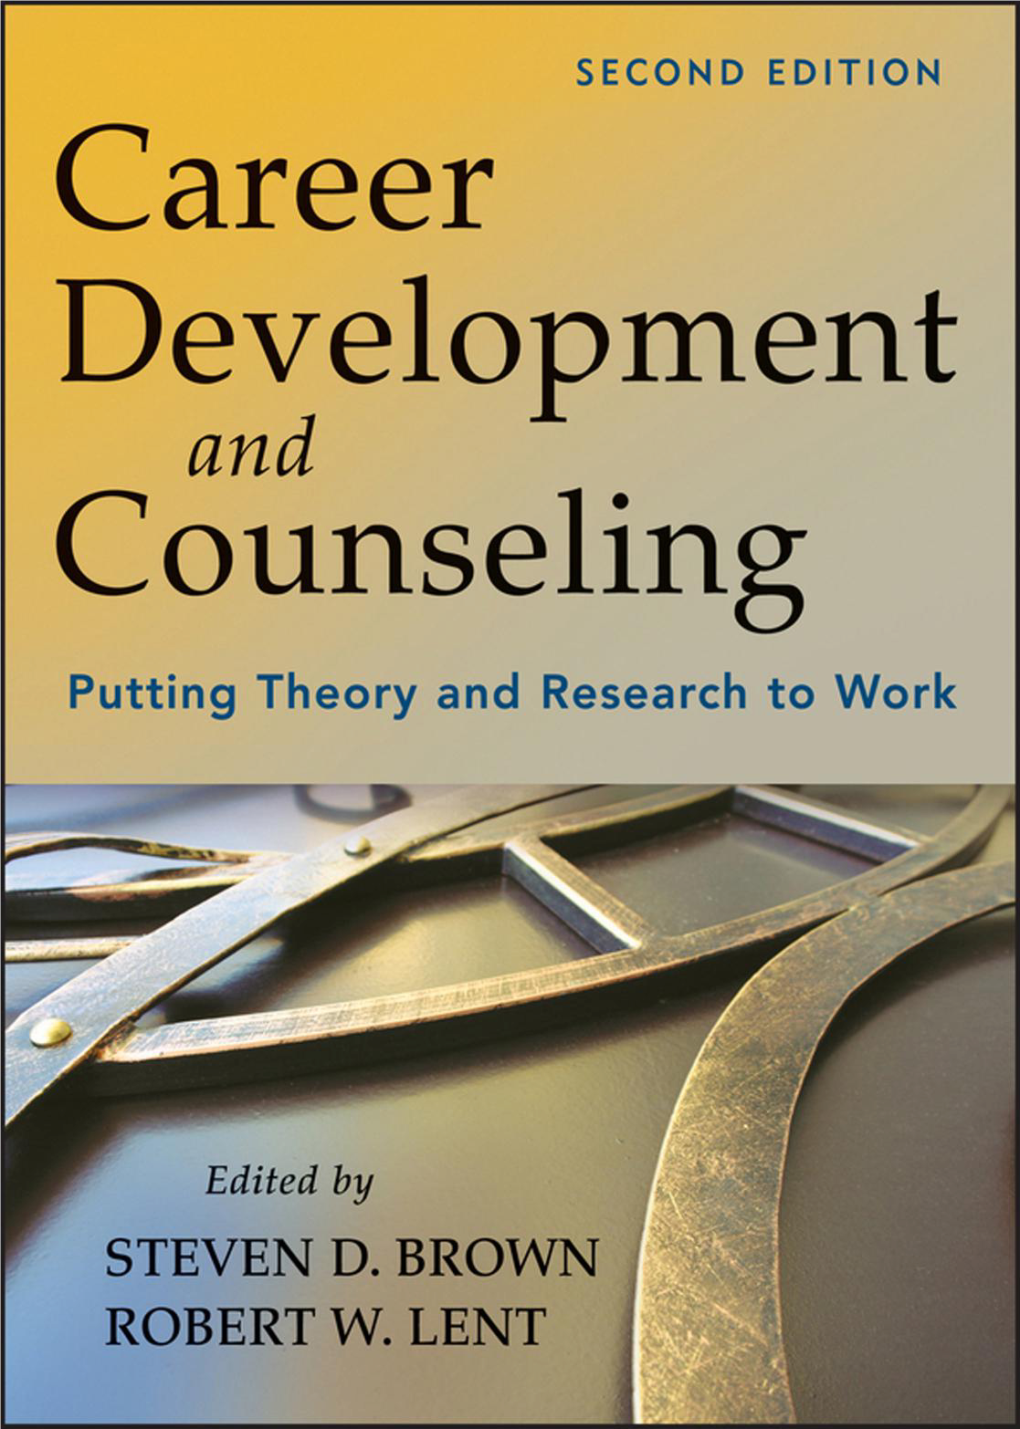 Career Development and Counseling: Putting Theory and Research to Work, Second Edition